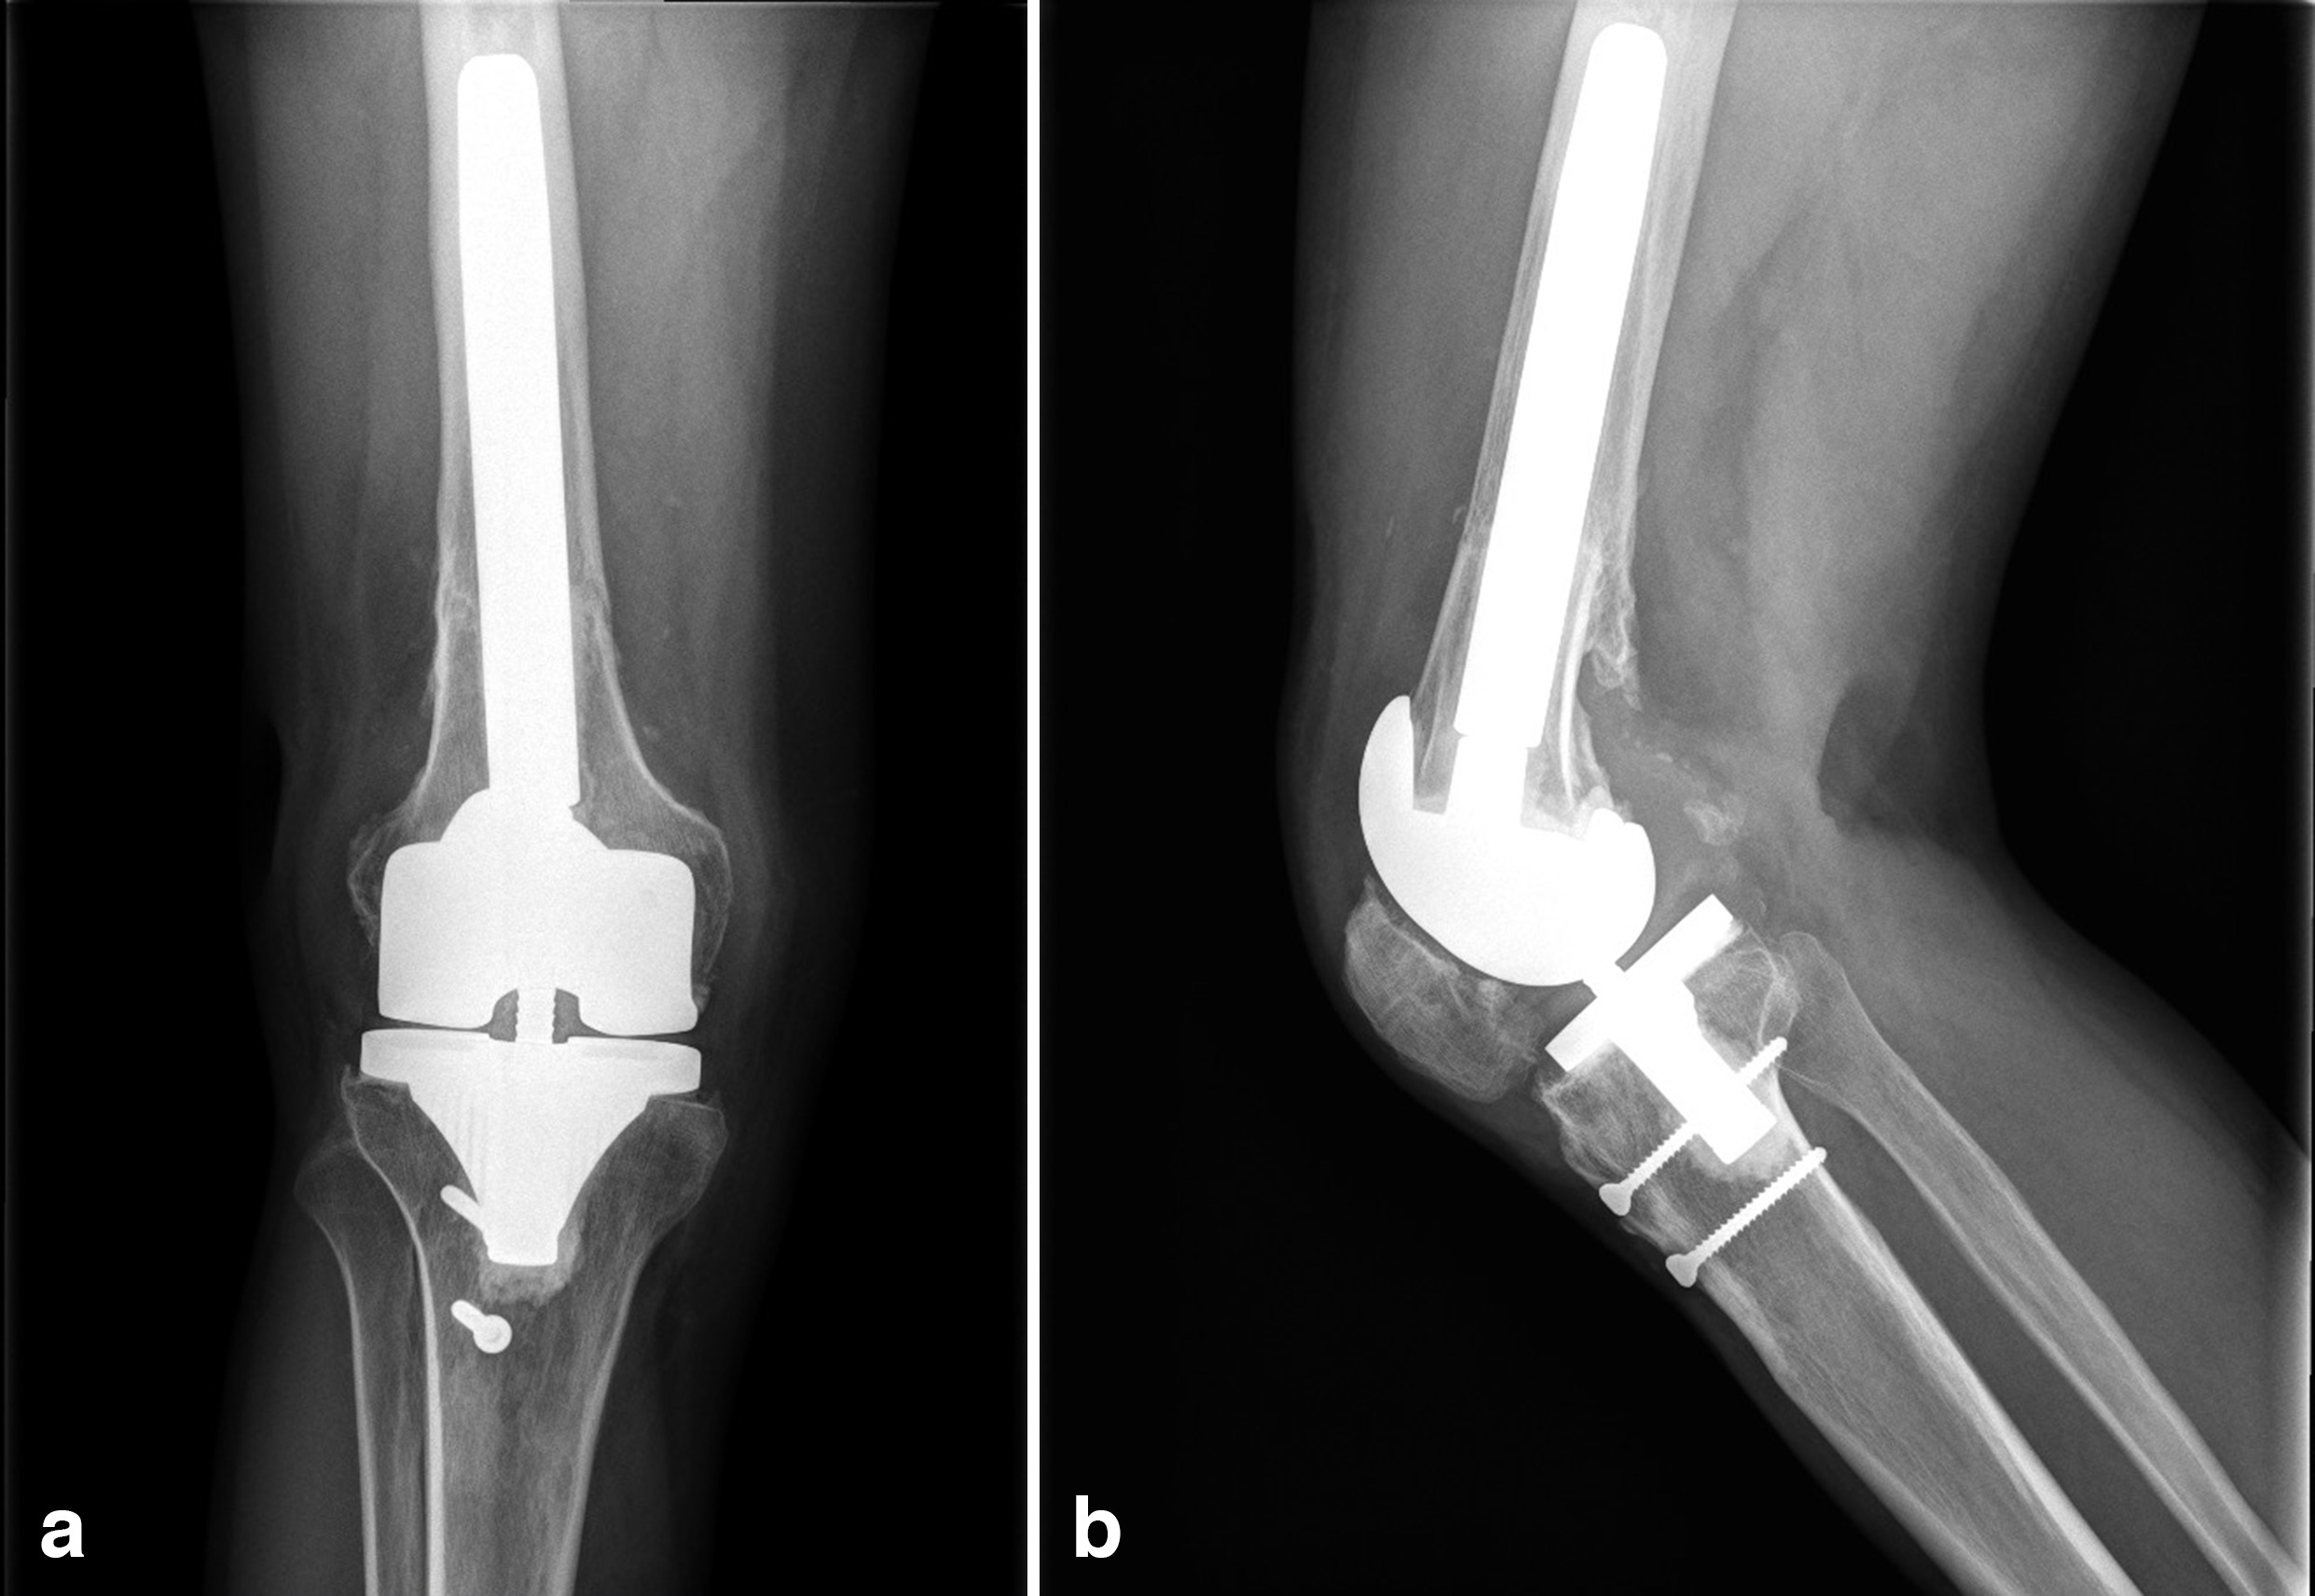 Fig. 5 
          Reconstructive surgery with allograft prostheses composite (APC) in a 25-year-old male patient. Anteroposterior and lateral radiographs show a femoral APC reconstruction at ten years follow-up.
        